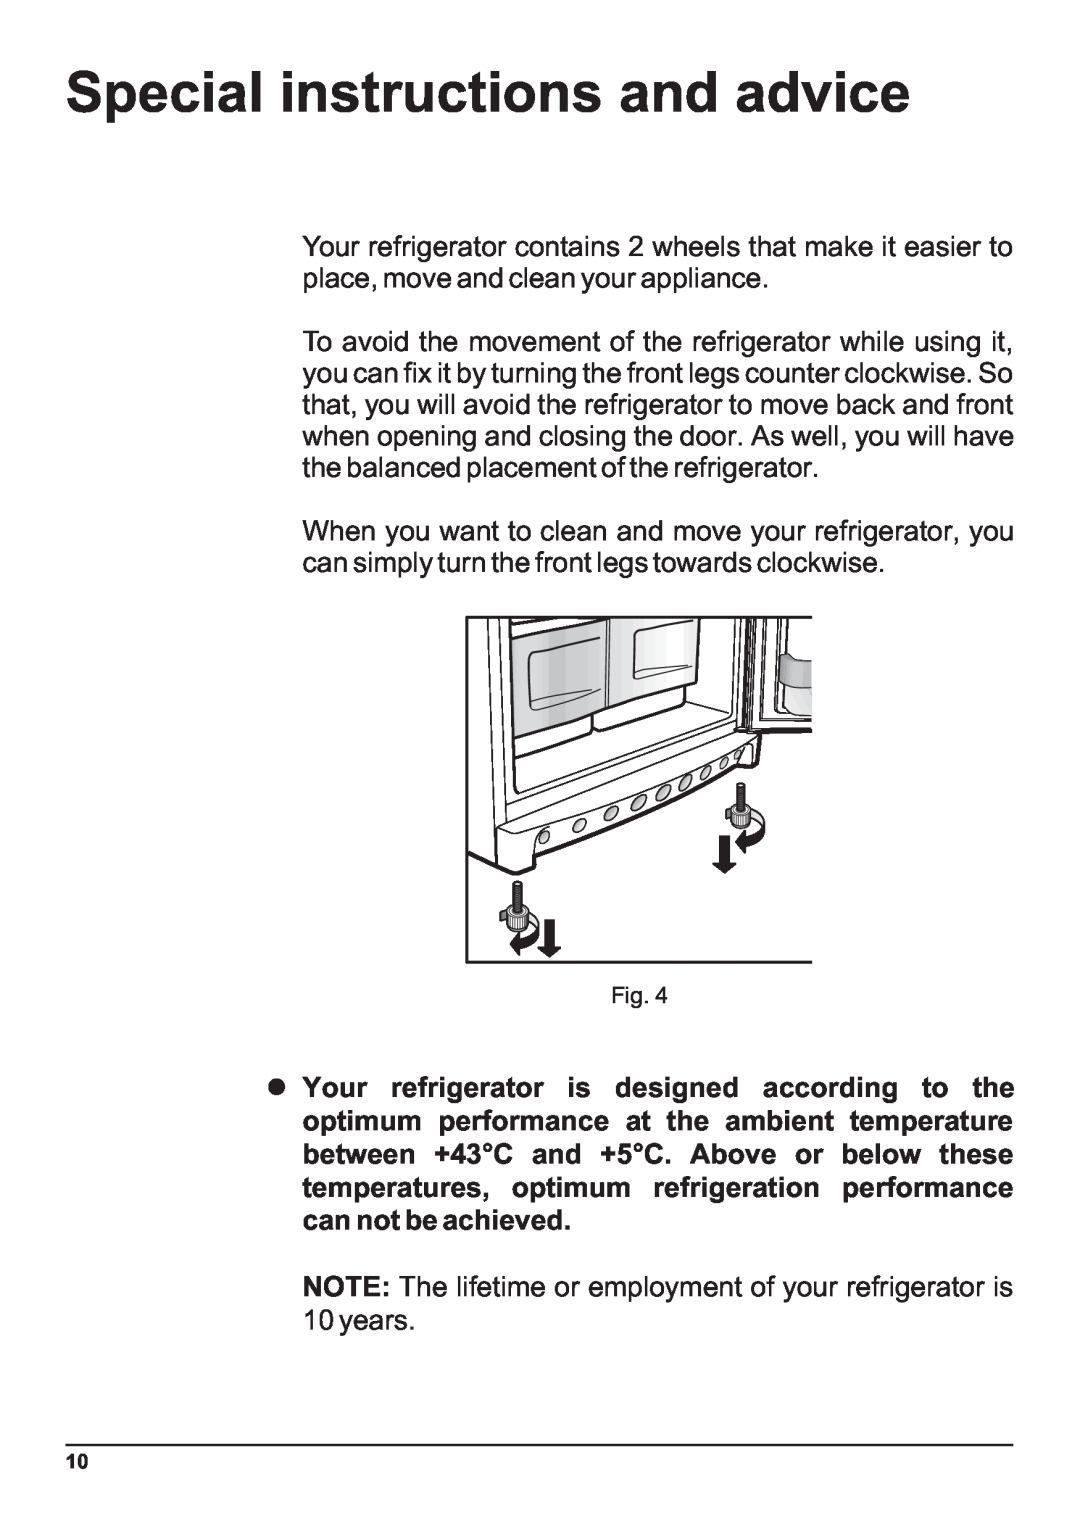 Indesit Two-Door Refrigerator/Freezer manual Special instructions and advice, years 